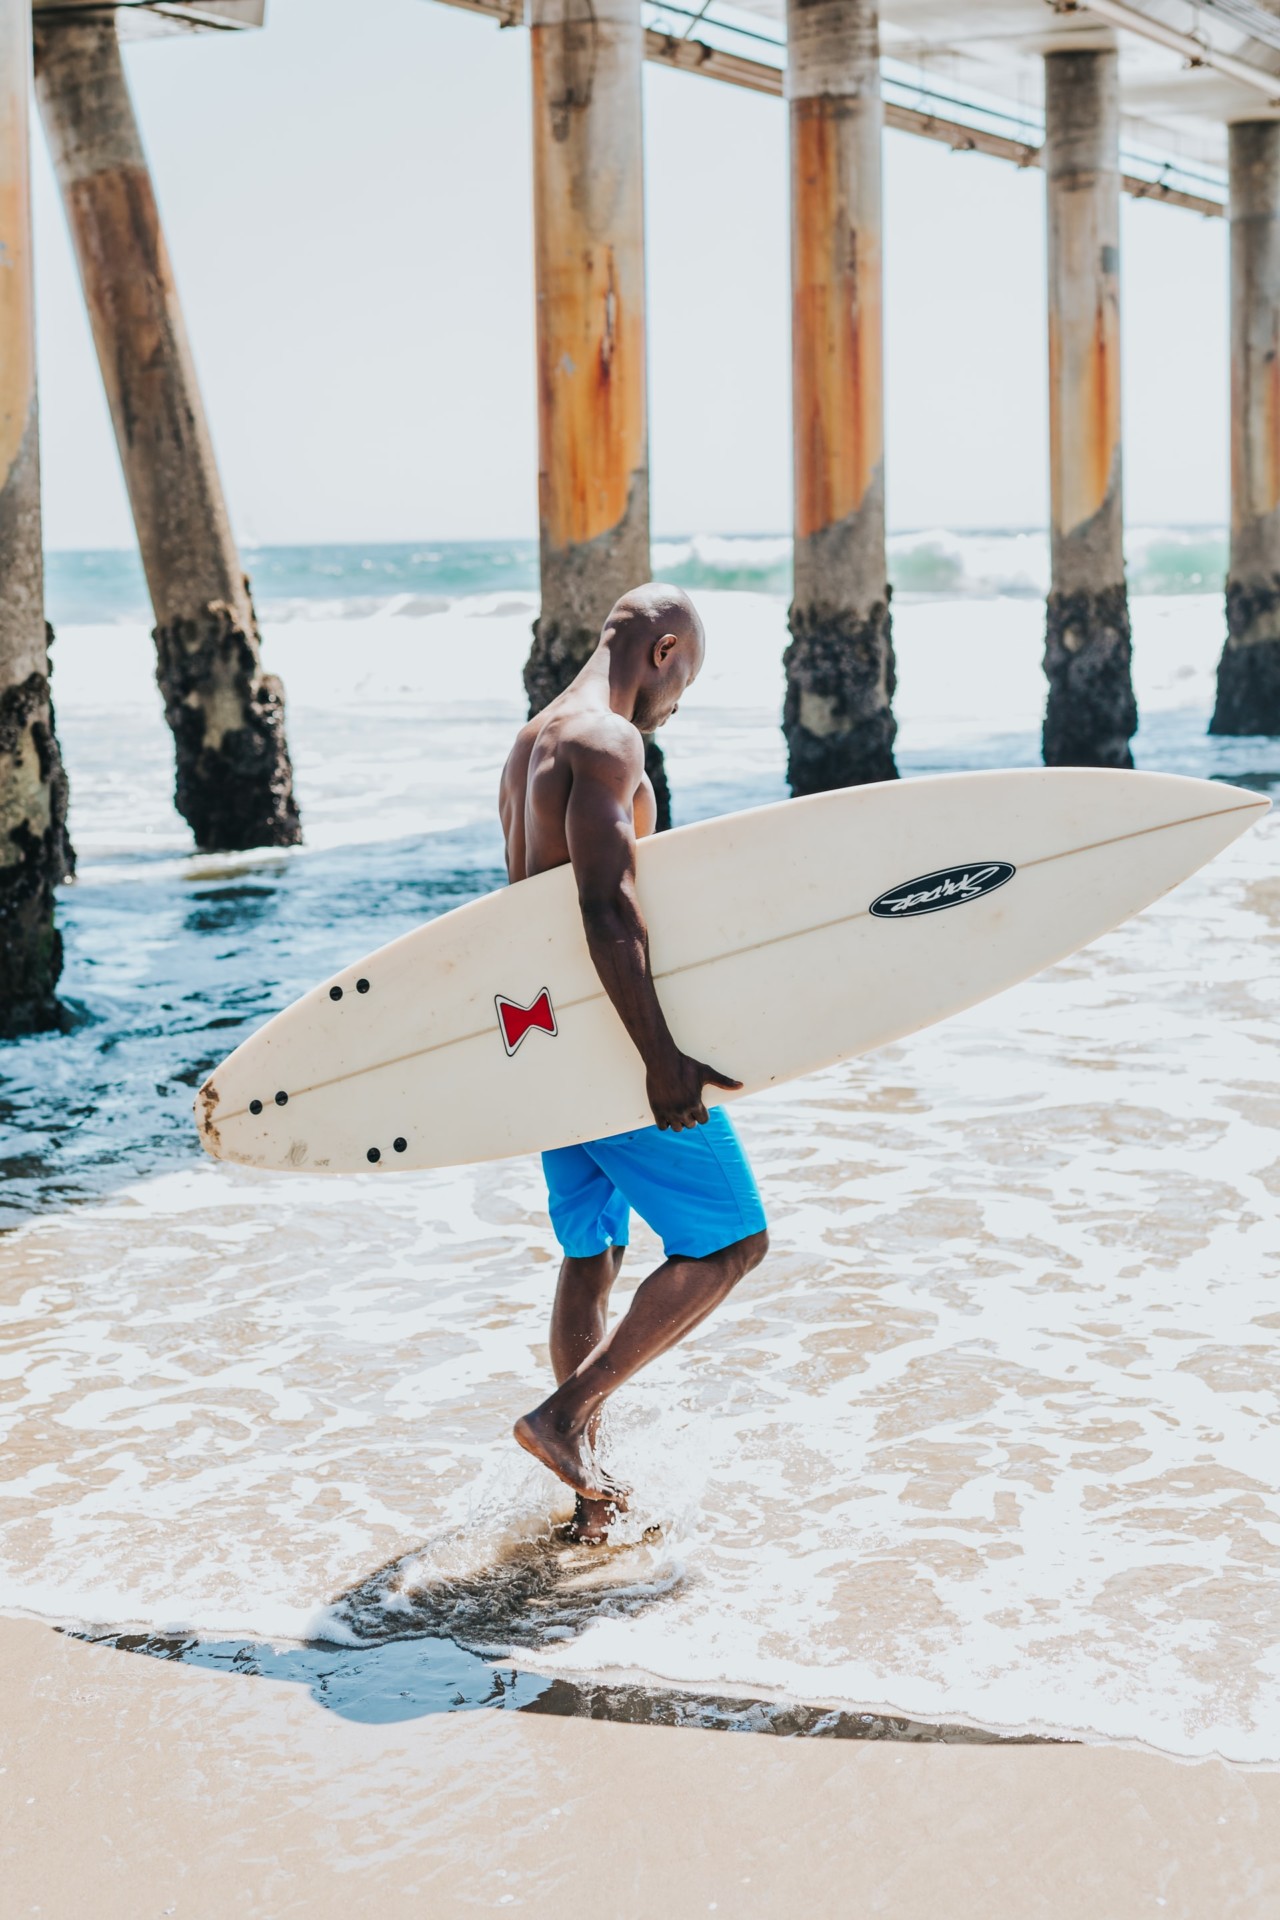 Do Surfers Go Bald? Facts You Should Know (+ Practical Tips)